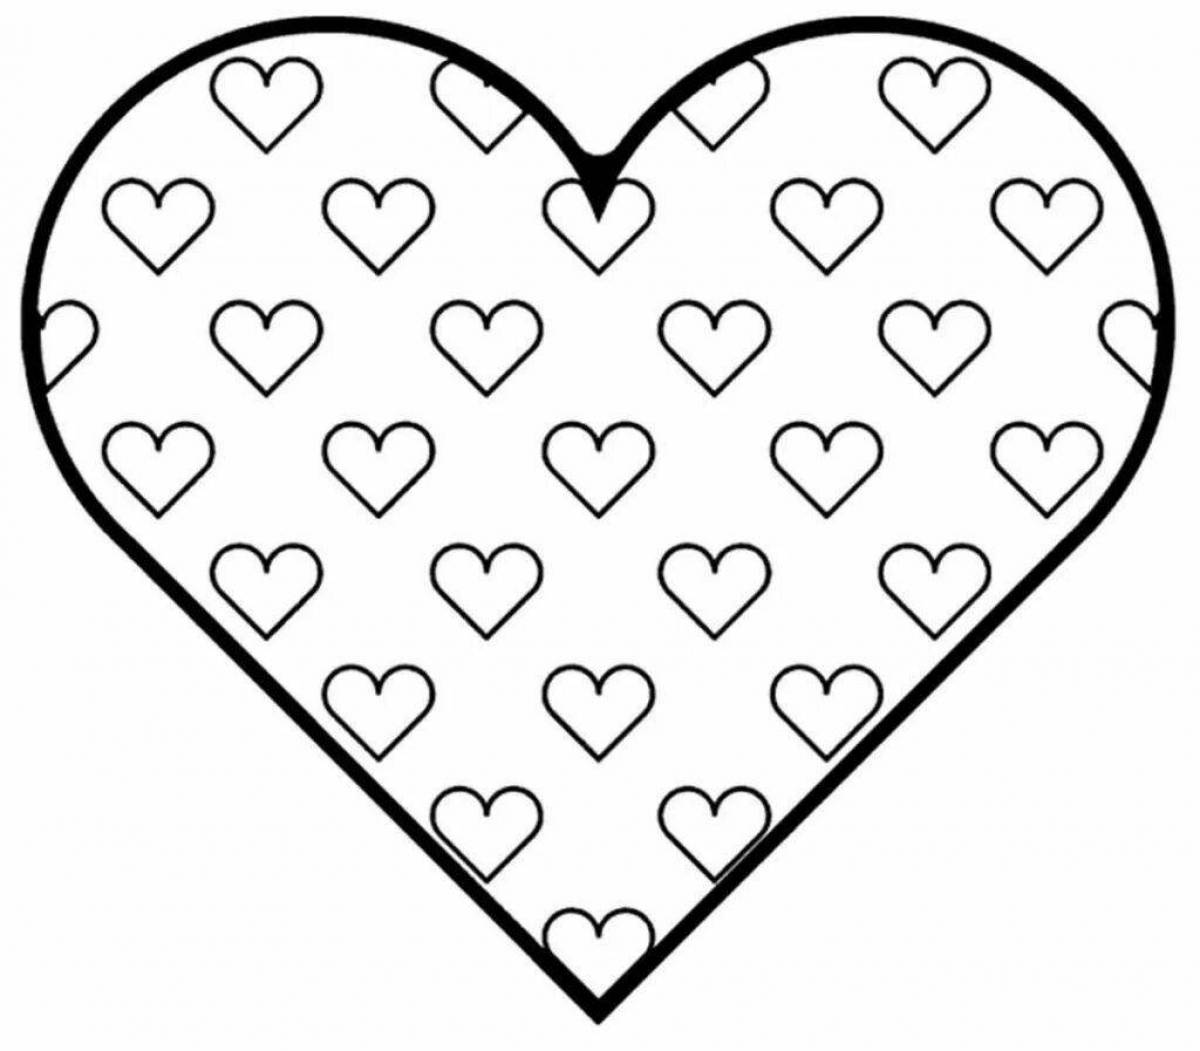 Exquisite minecraft heart coloring page